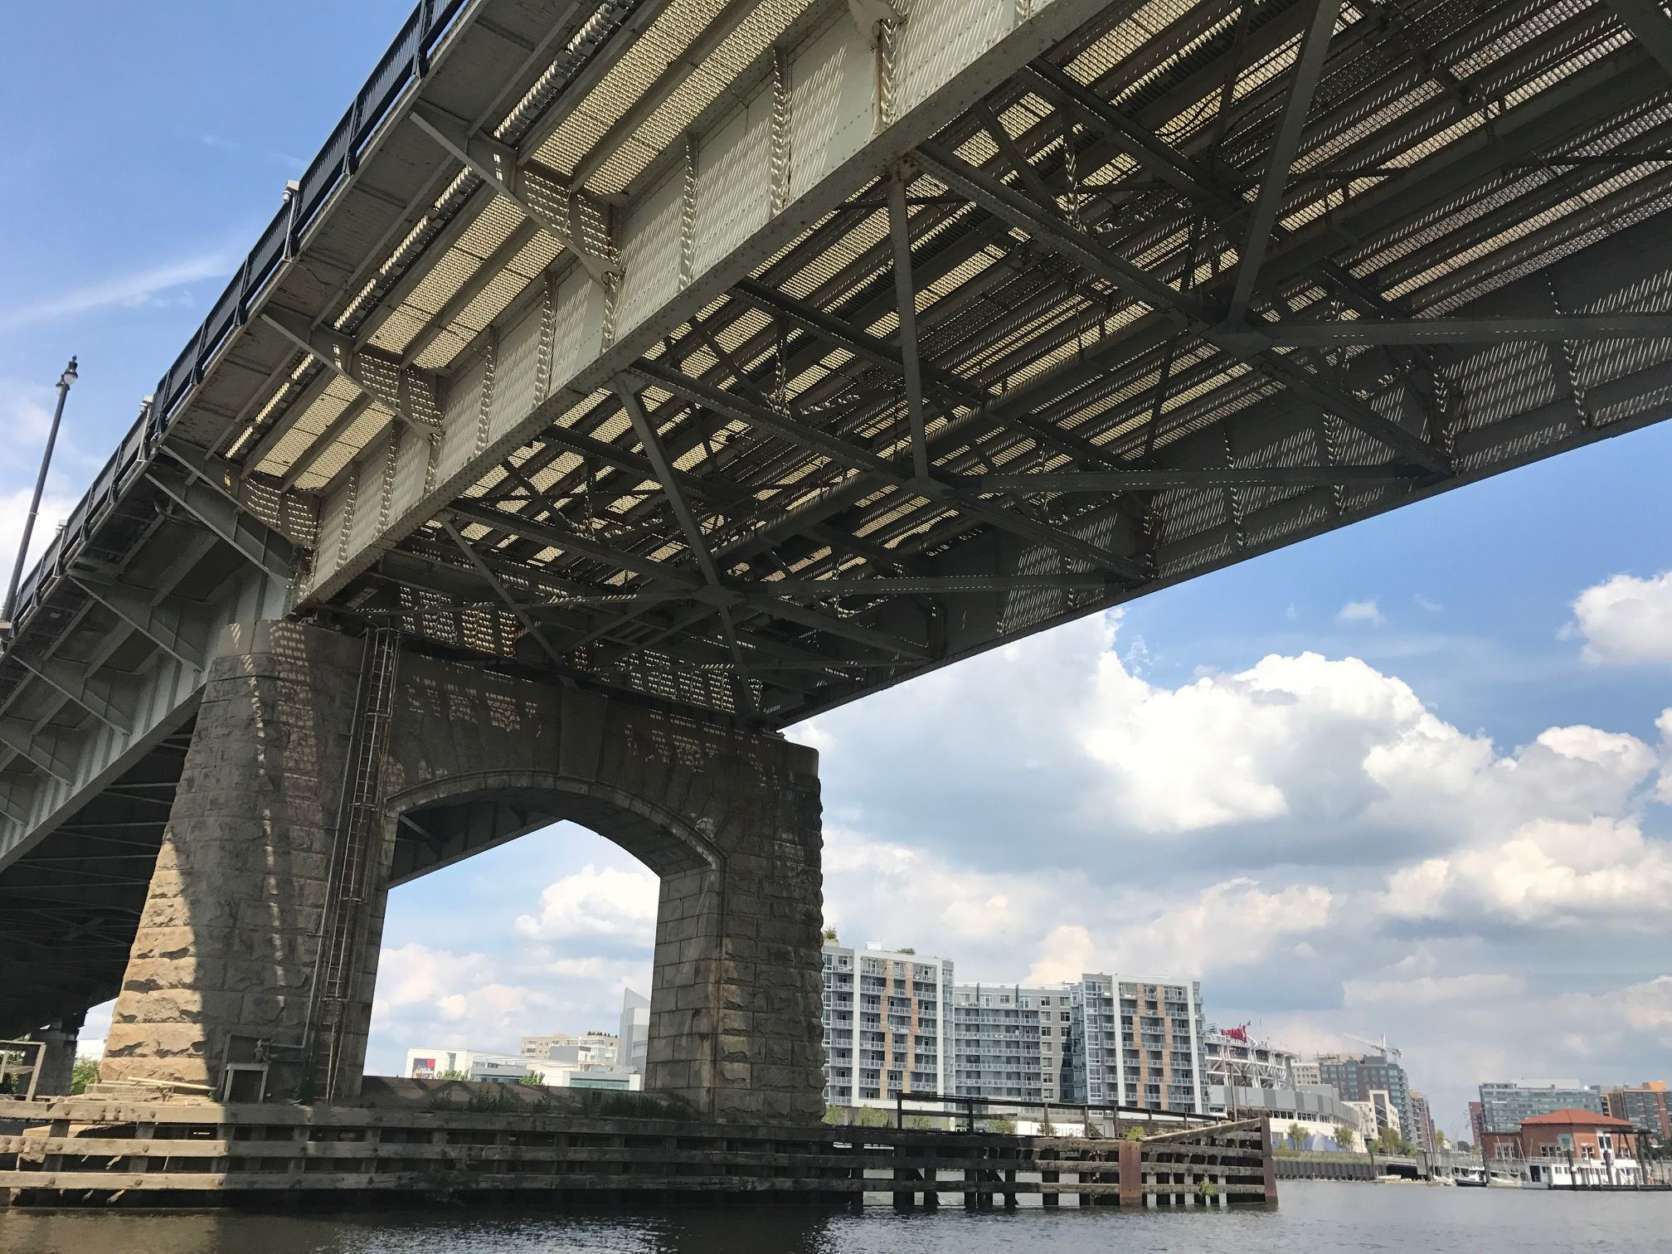 Demolition on the 68-year-old Frederick Douglass Memorial Bridge will begin following the new bridge’s completion. (WTOP/Megan Cloherty)